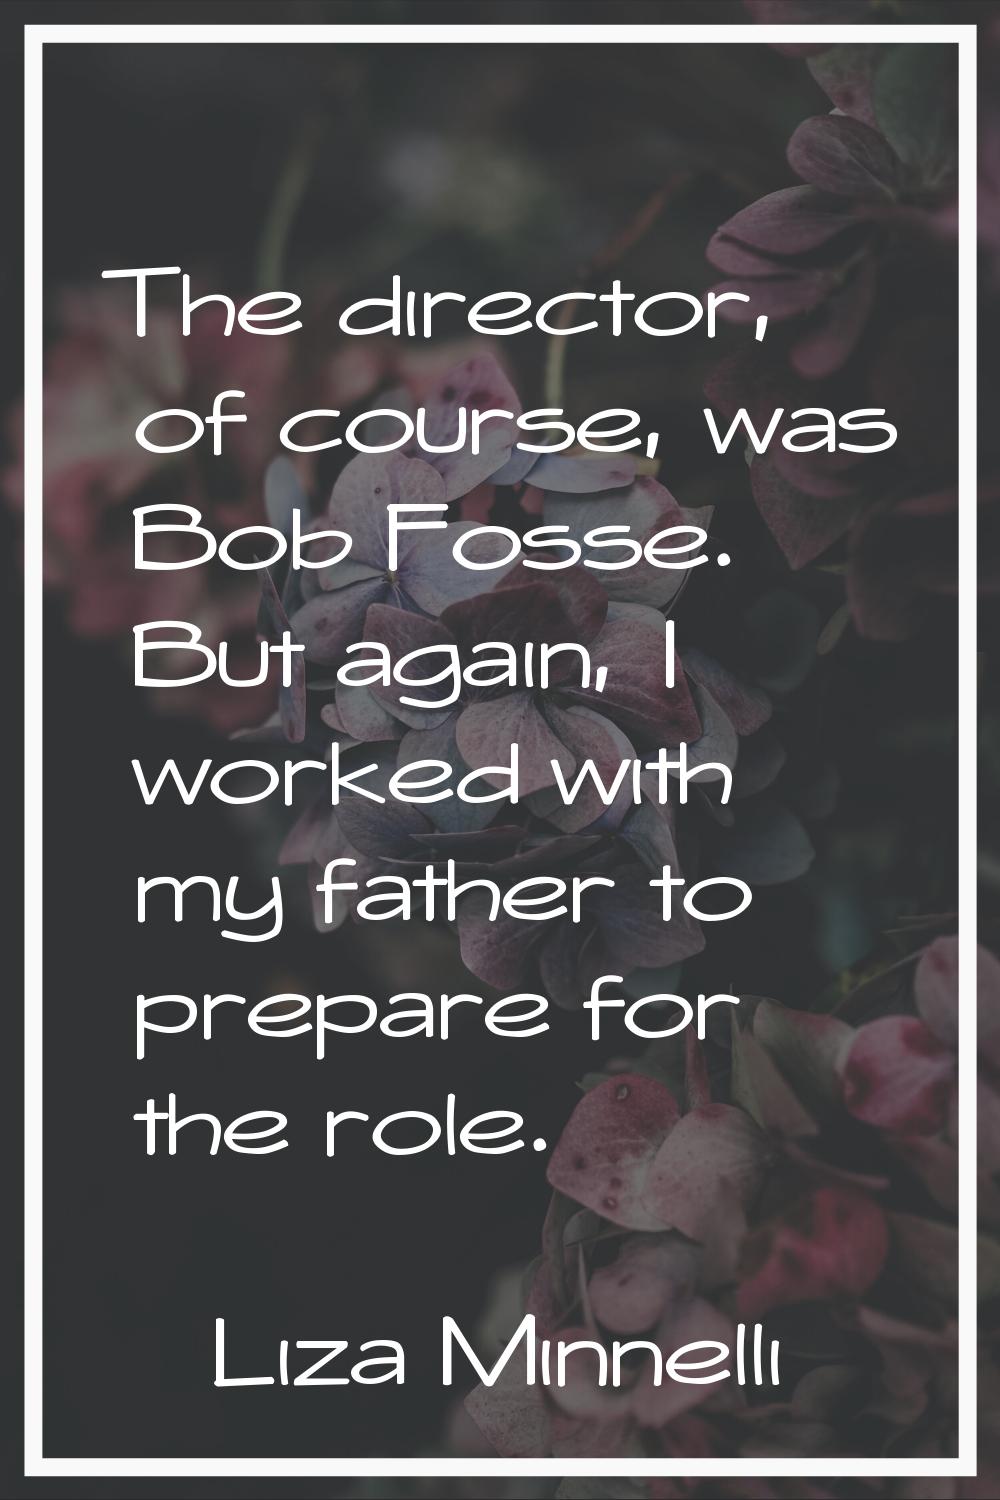 The director, of course, was Bob Fosse. But again, I worked with my father to prepare for the role.